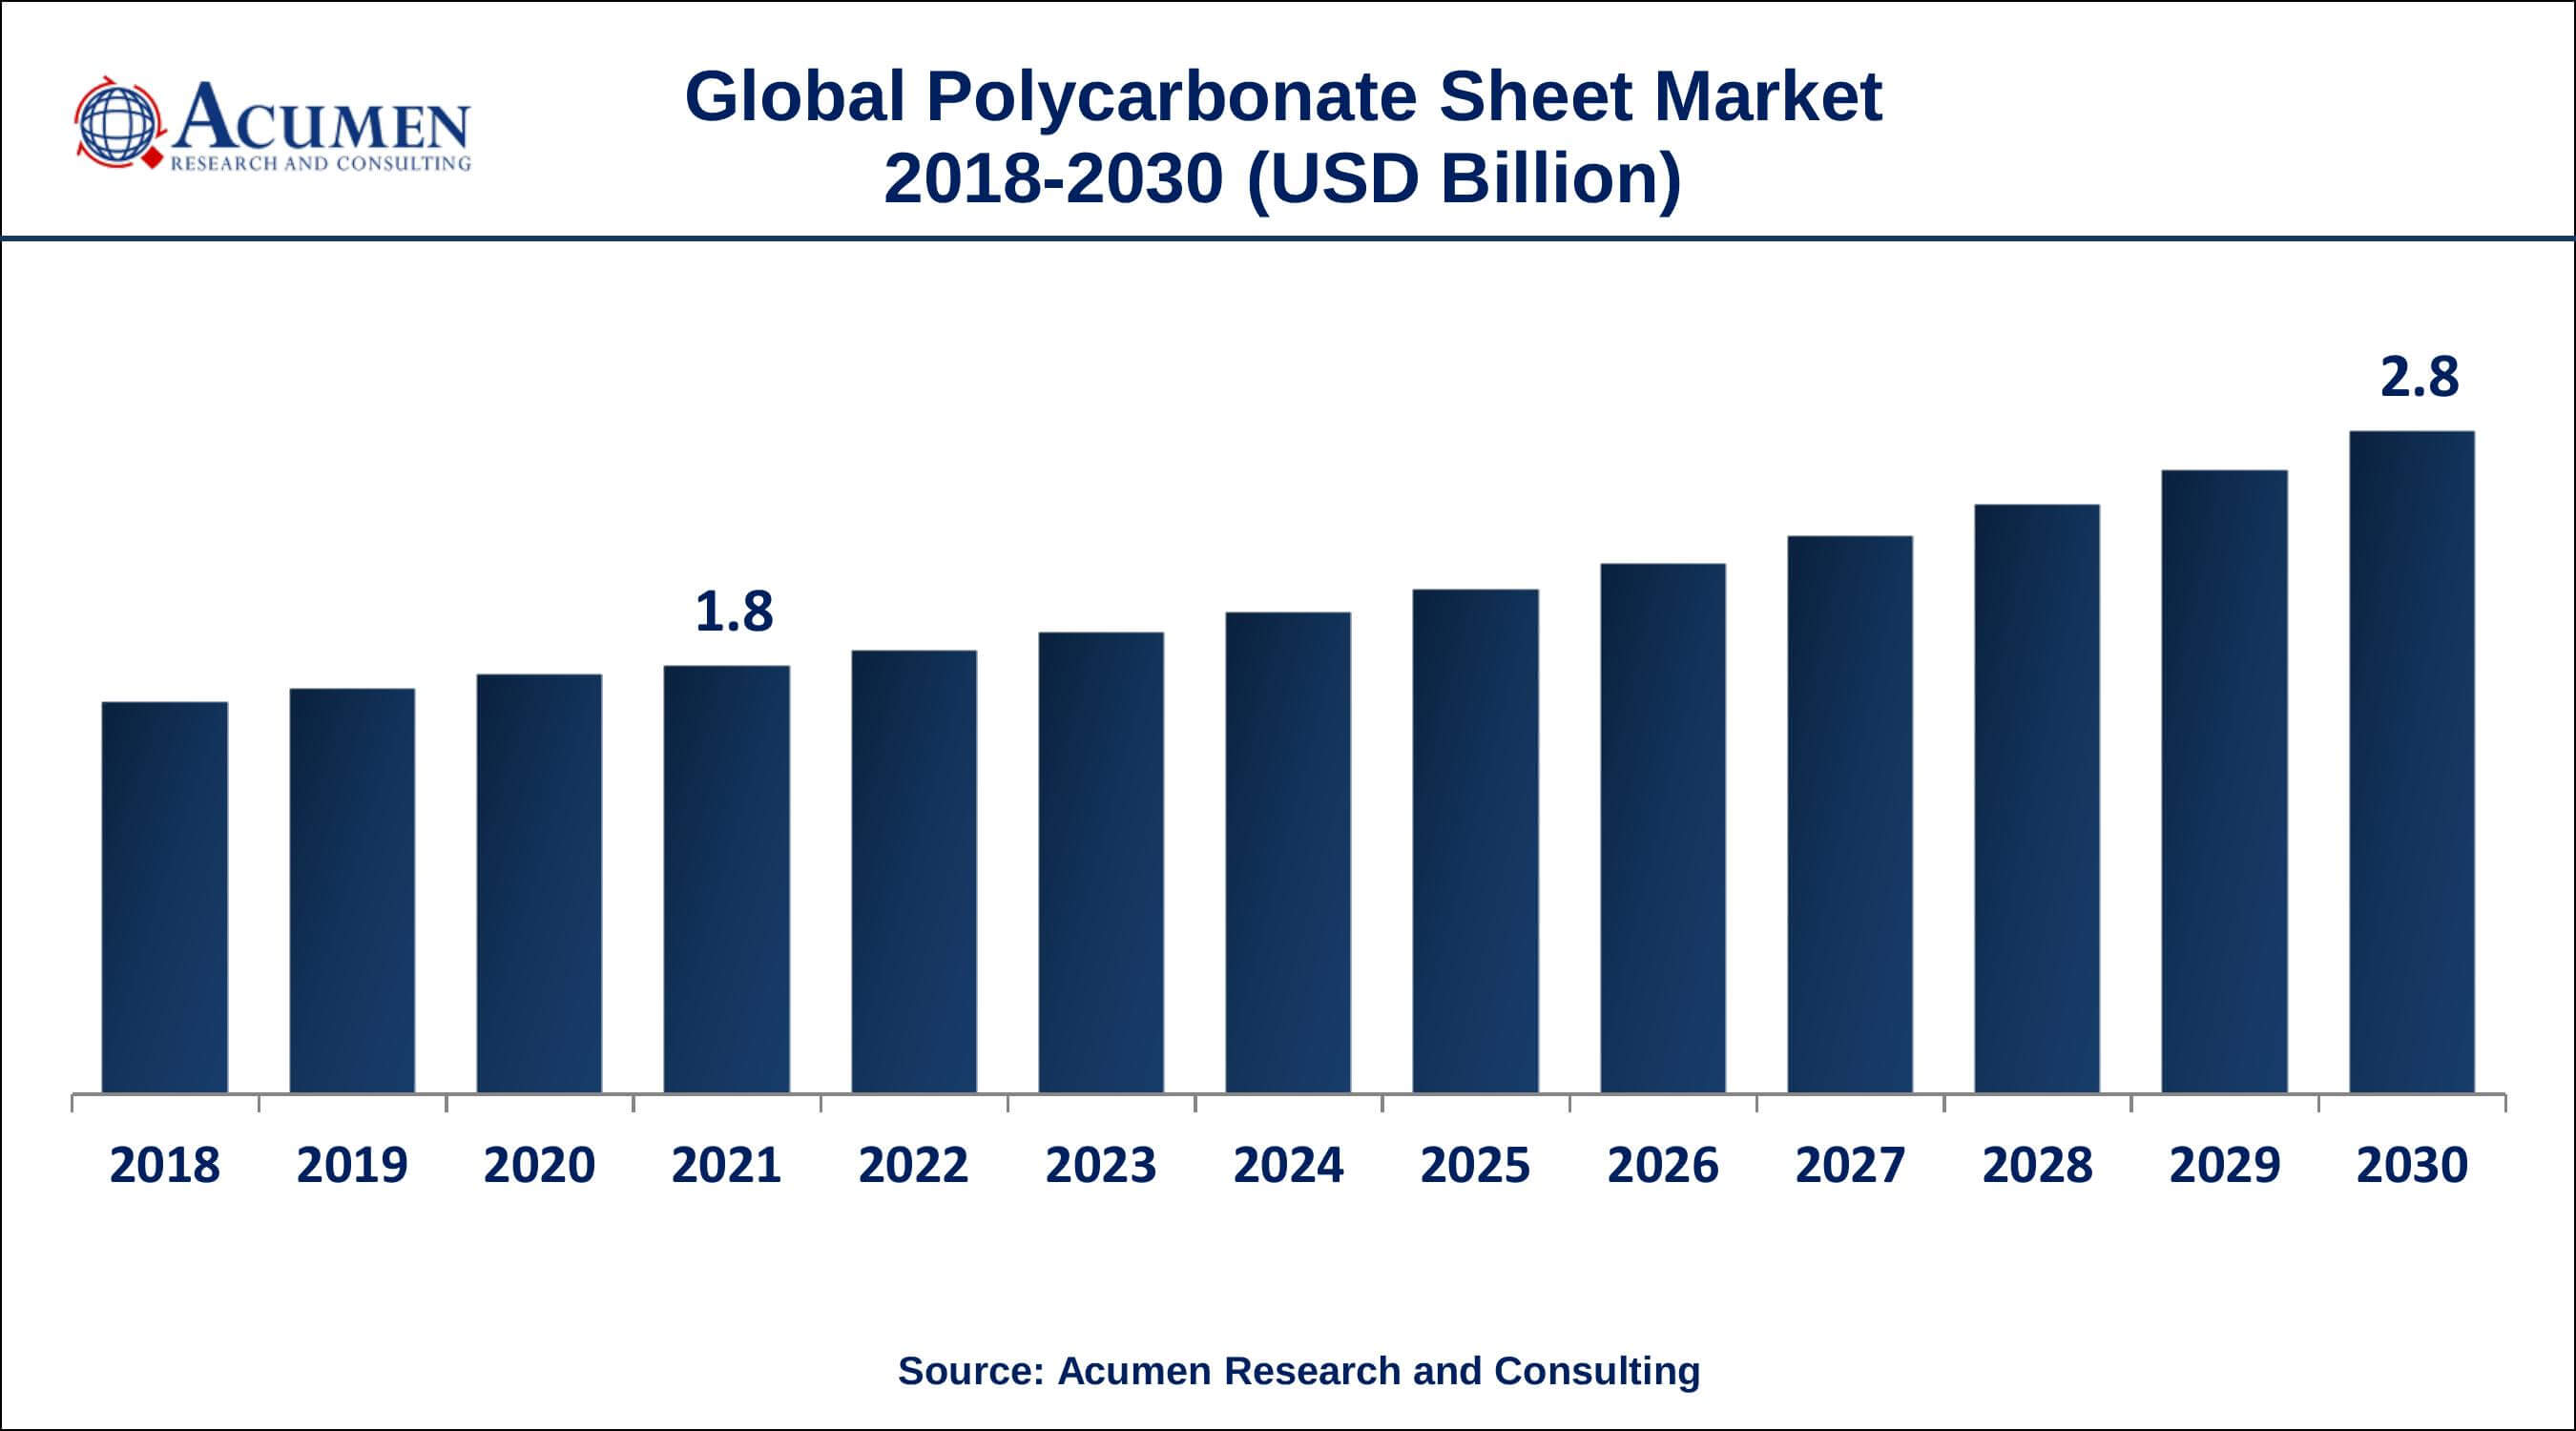 North America and Europe polycarbonate sheet market growth will observe fastest CAGR from 2022 to 2030